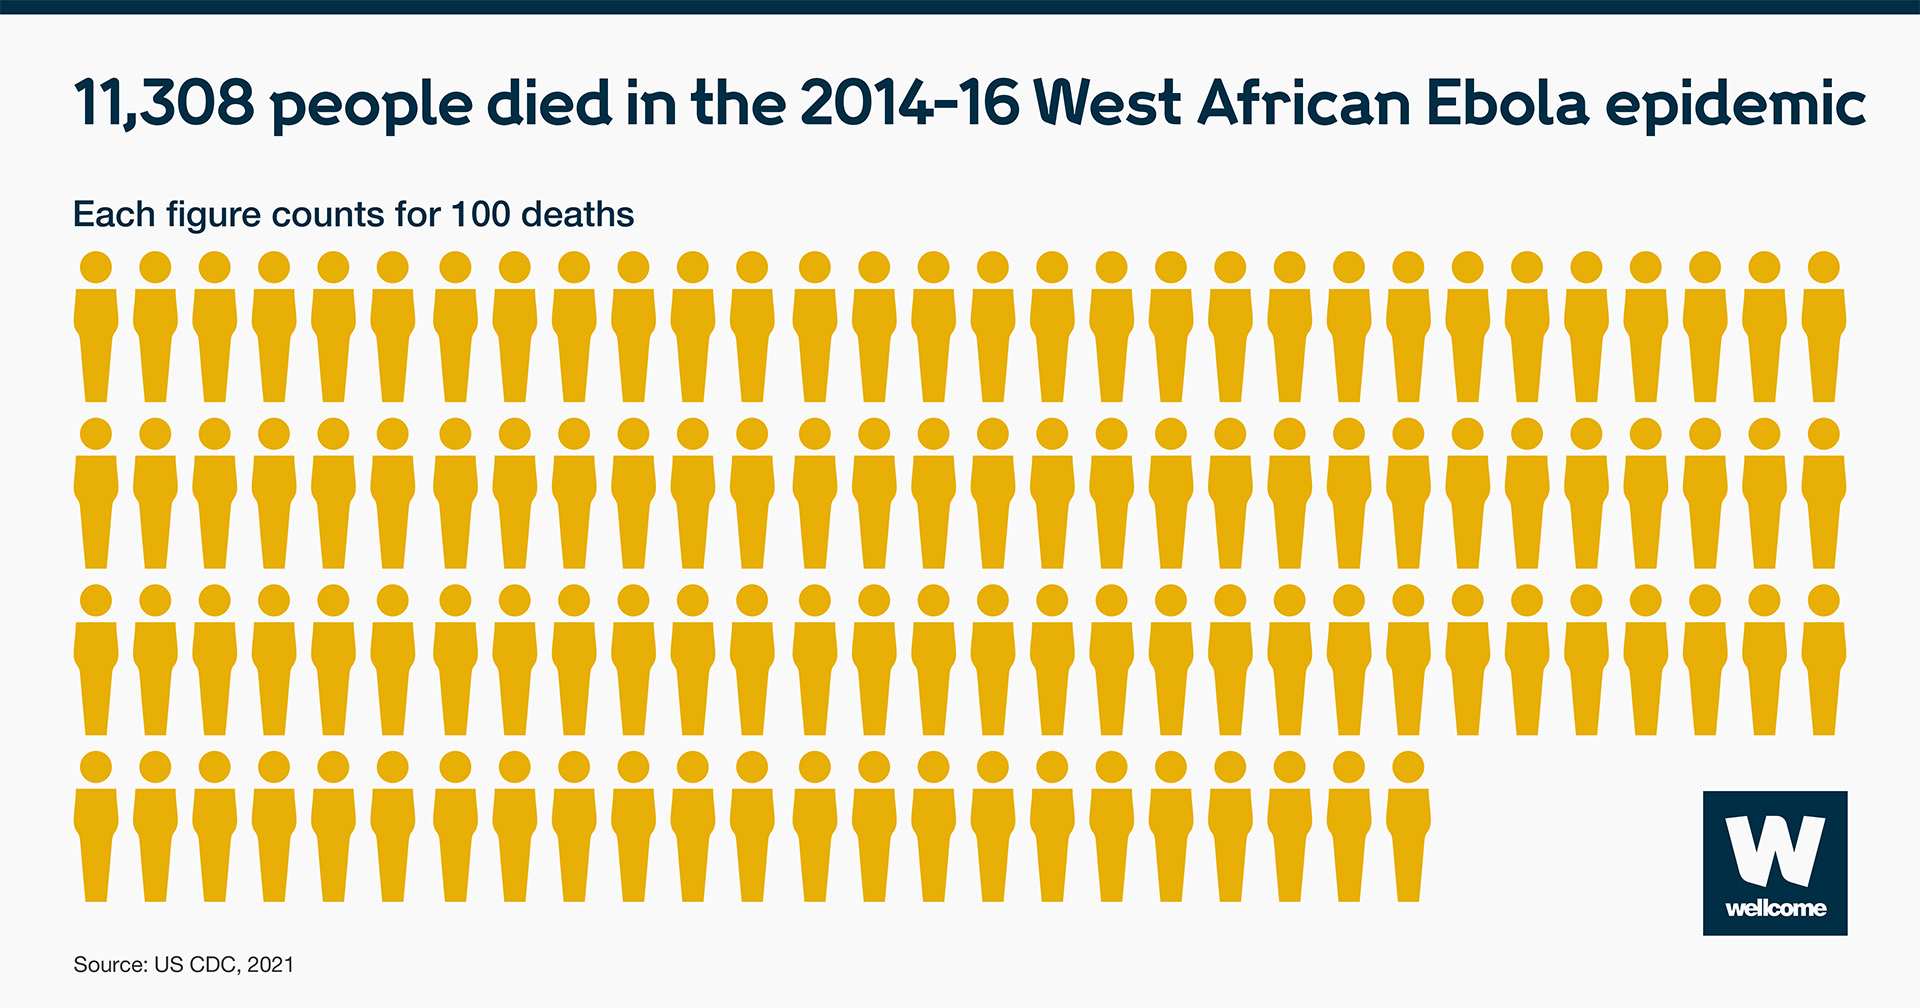 Figures representing the 11,308 people who died during the 2014-16 West African Ebola epidemic